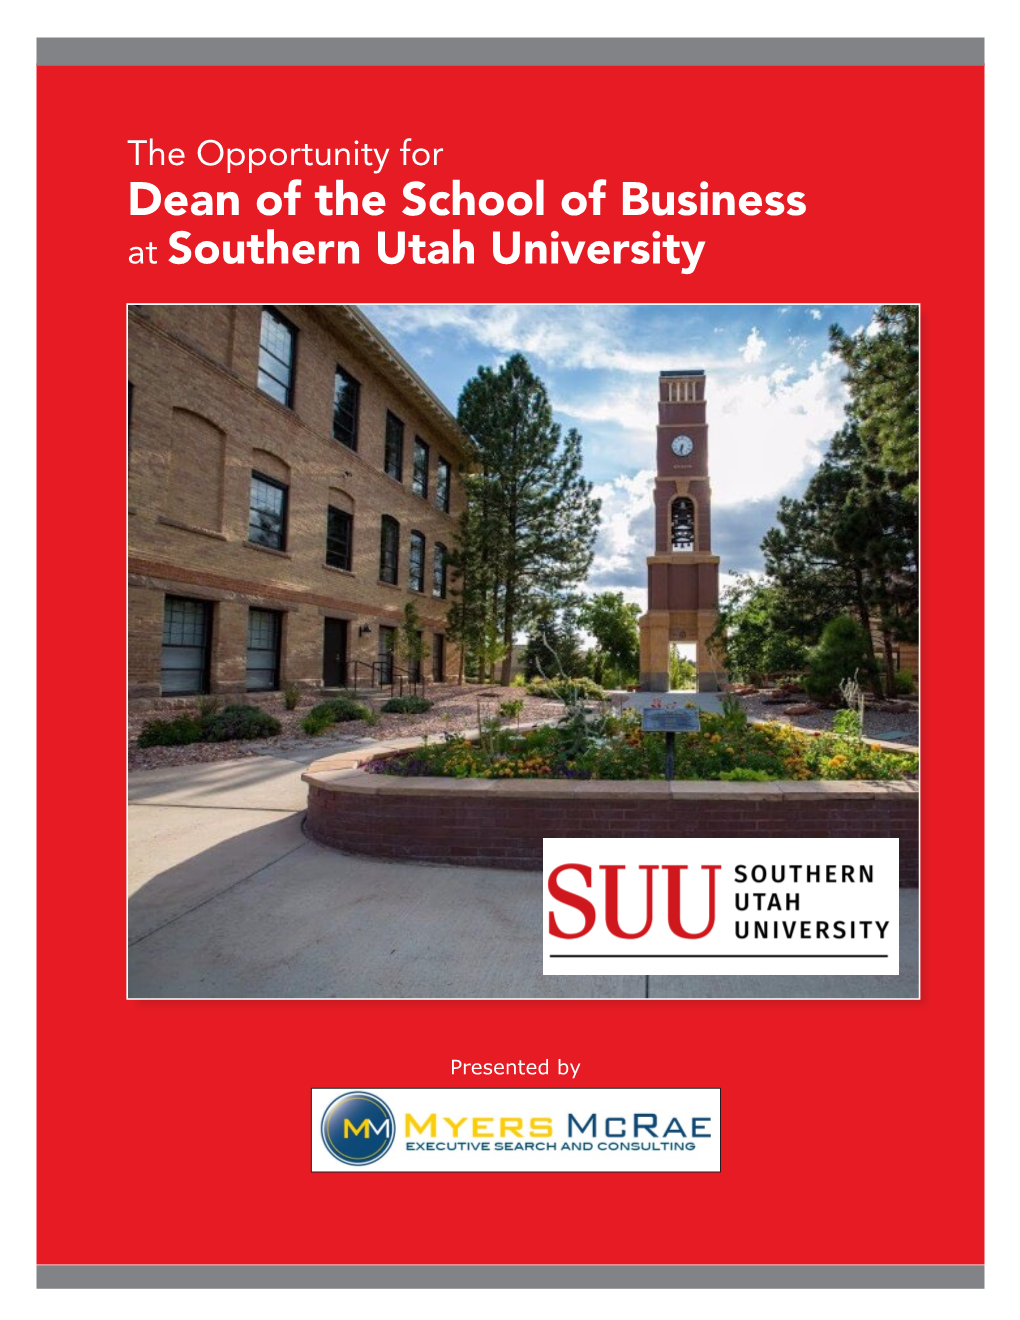 Dean of the School of Business at Southern Utah University